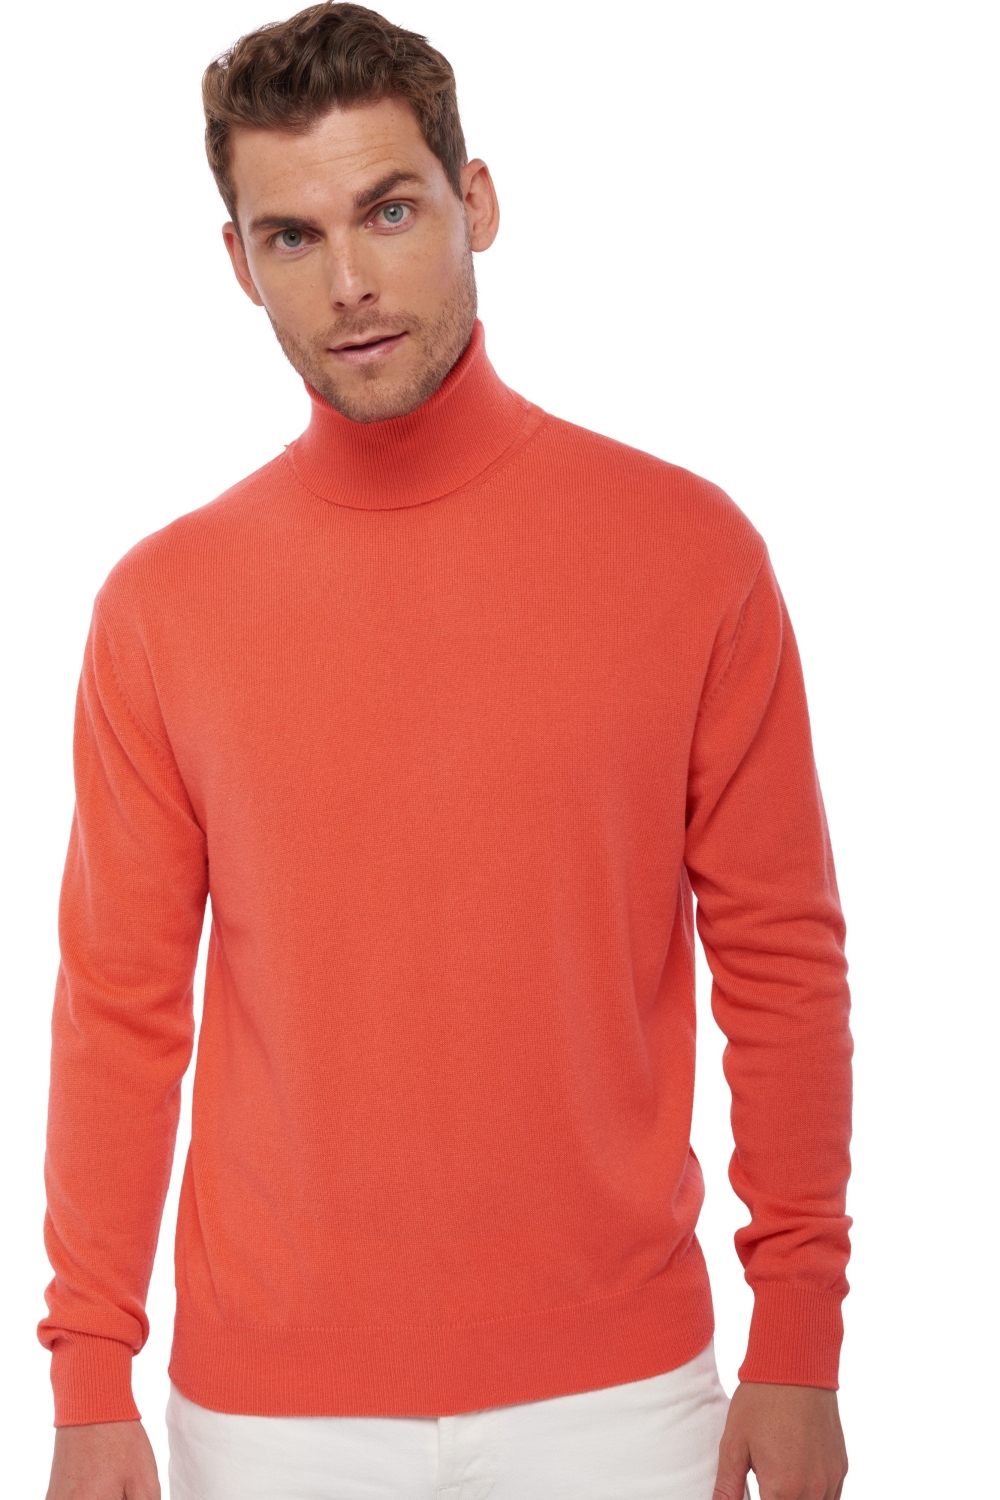 Cachemire pull homme col roule edgar corail lumineux l